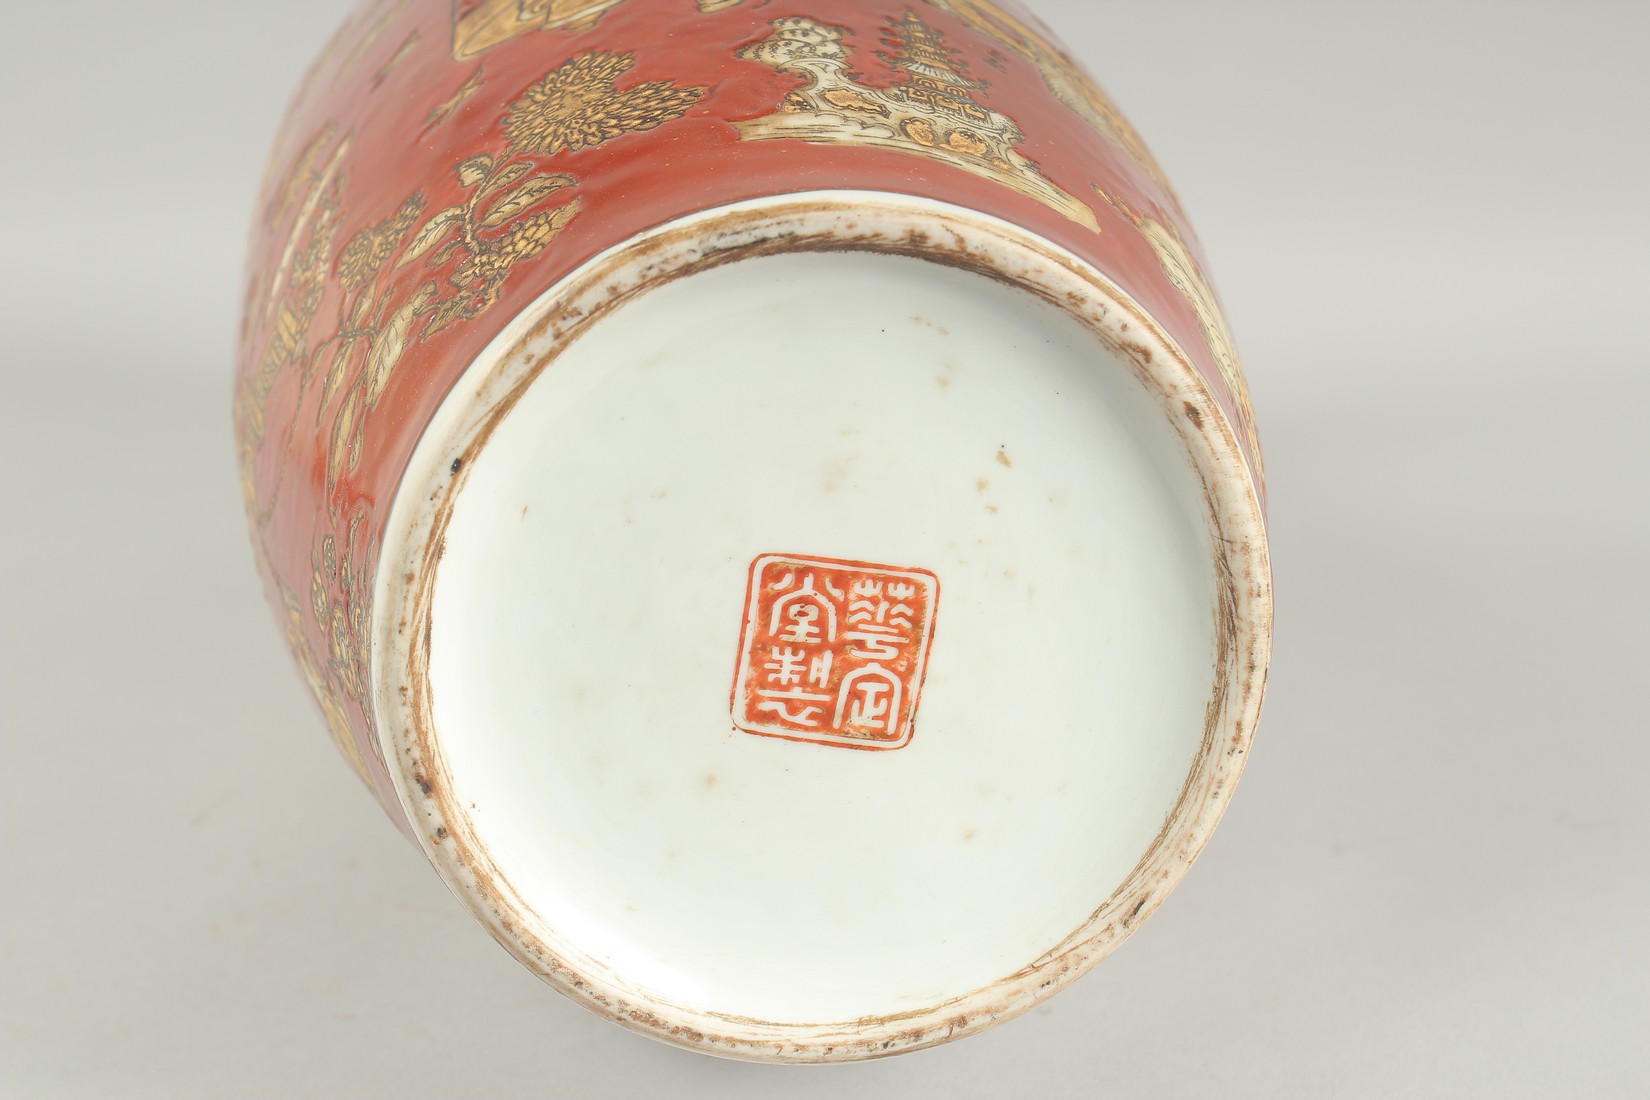 A LARGE CHINESE RED GLAZE PORCELAIN VASE, decorated with figures on a boat as well as pagodas and - Image 6 of 6